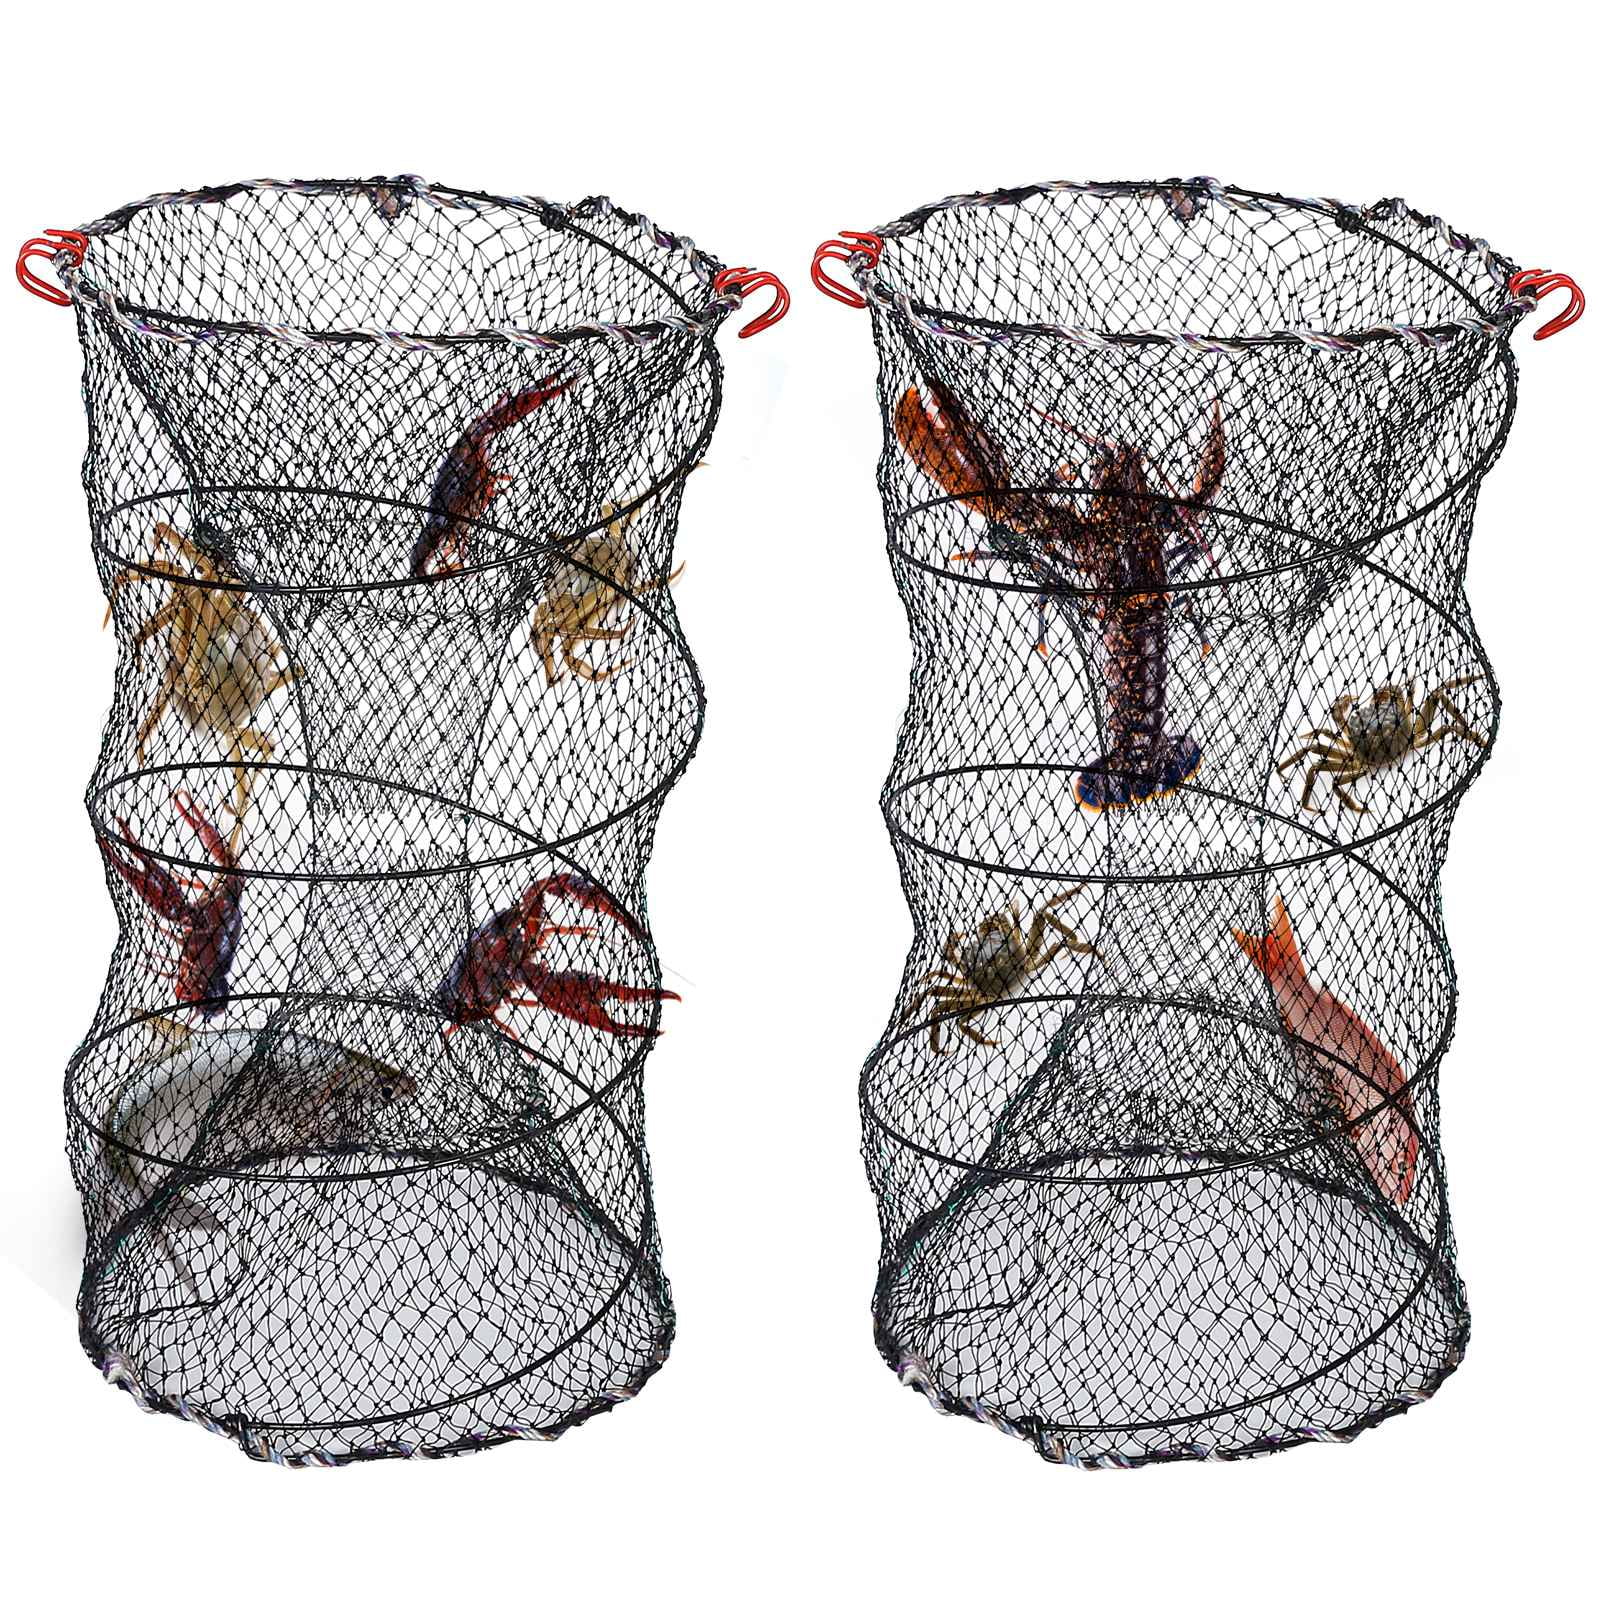  mouhike Collapsible Fish Basket Mesh Fish Trap Portable Fish  Cage Foldable Fishing Keep Net for Keeping Fish Alive, Bait Storage  Crayfish Crab Minnows Shrimps Lobsters : Sports & Outdoors